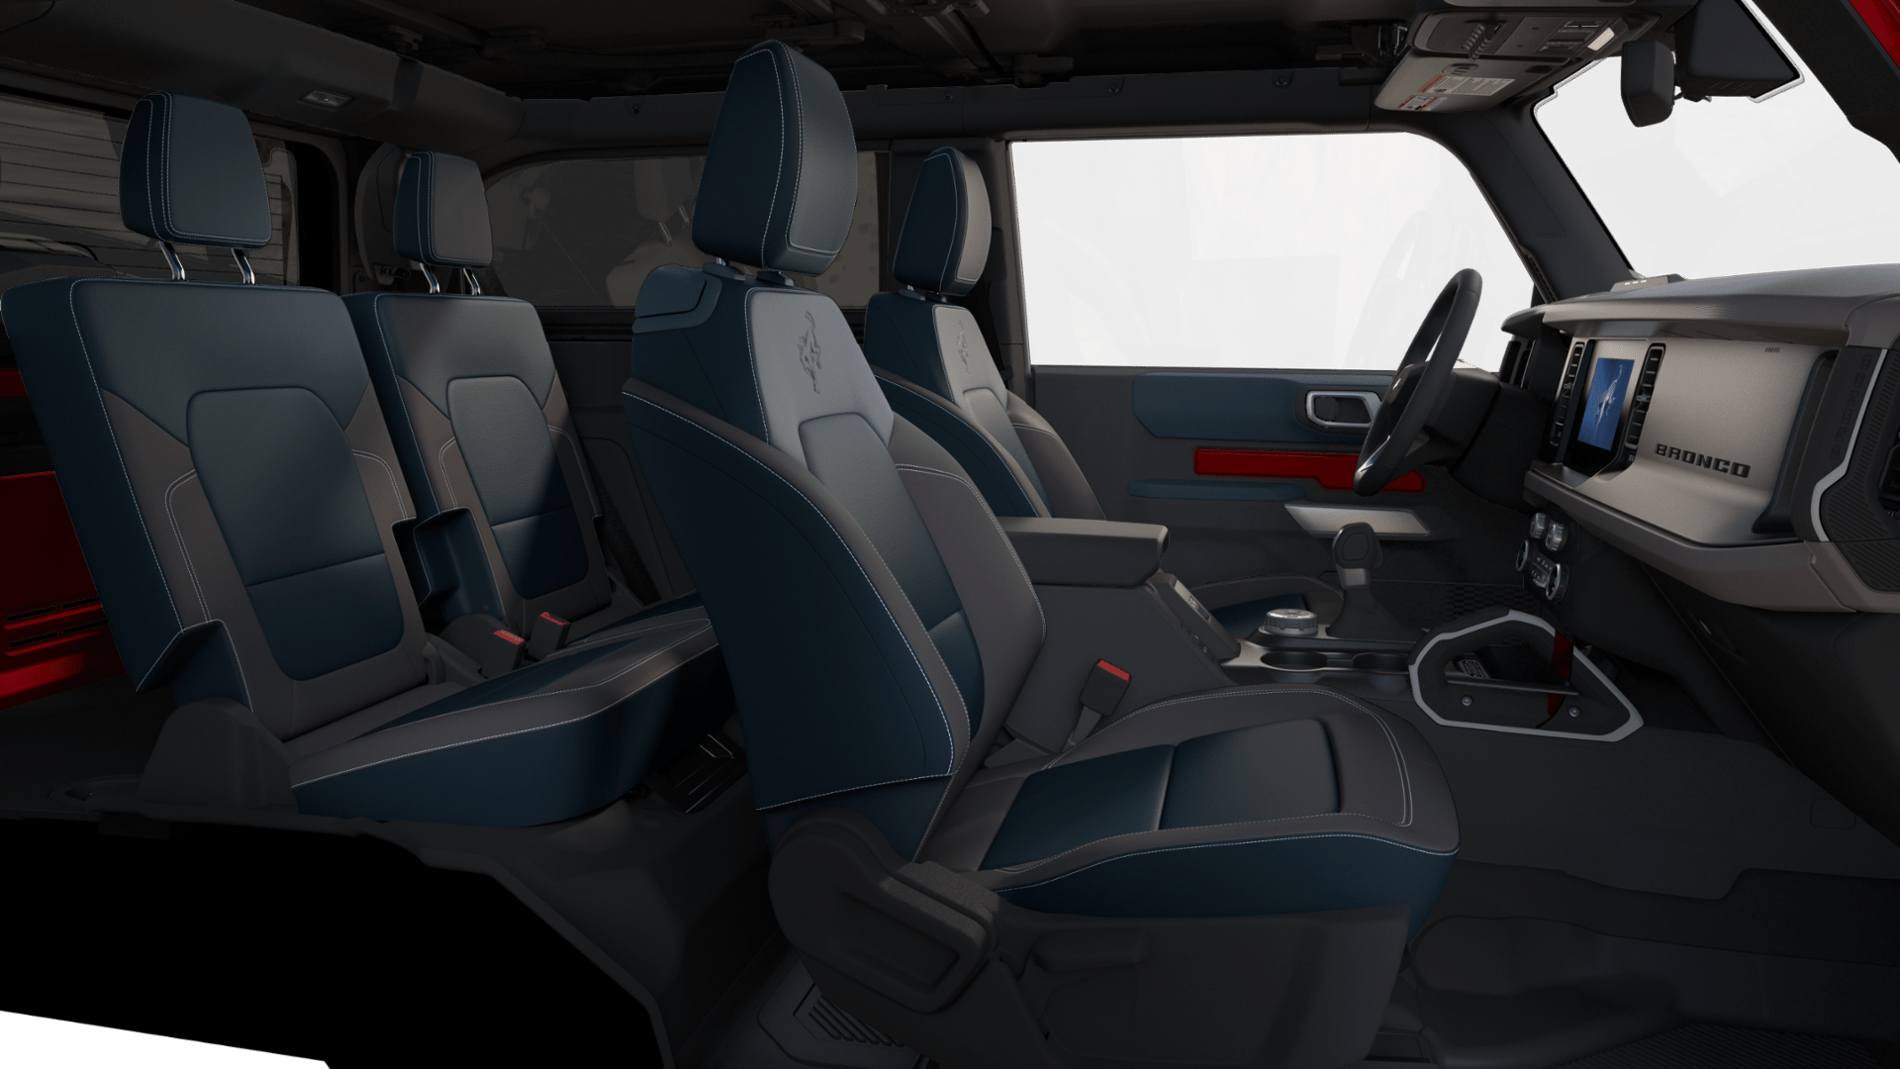 Ford Bronco First Edition Bronco Will Have Navy Pier Interior Option Only F977CECA-6AC6-4B11-9F16-91EBDA384D1E